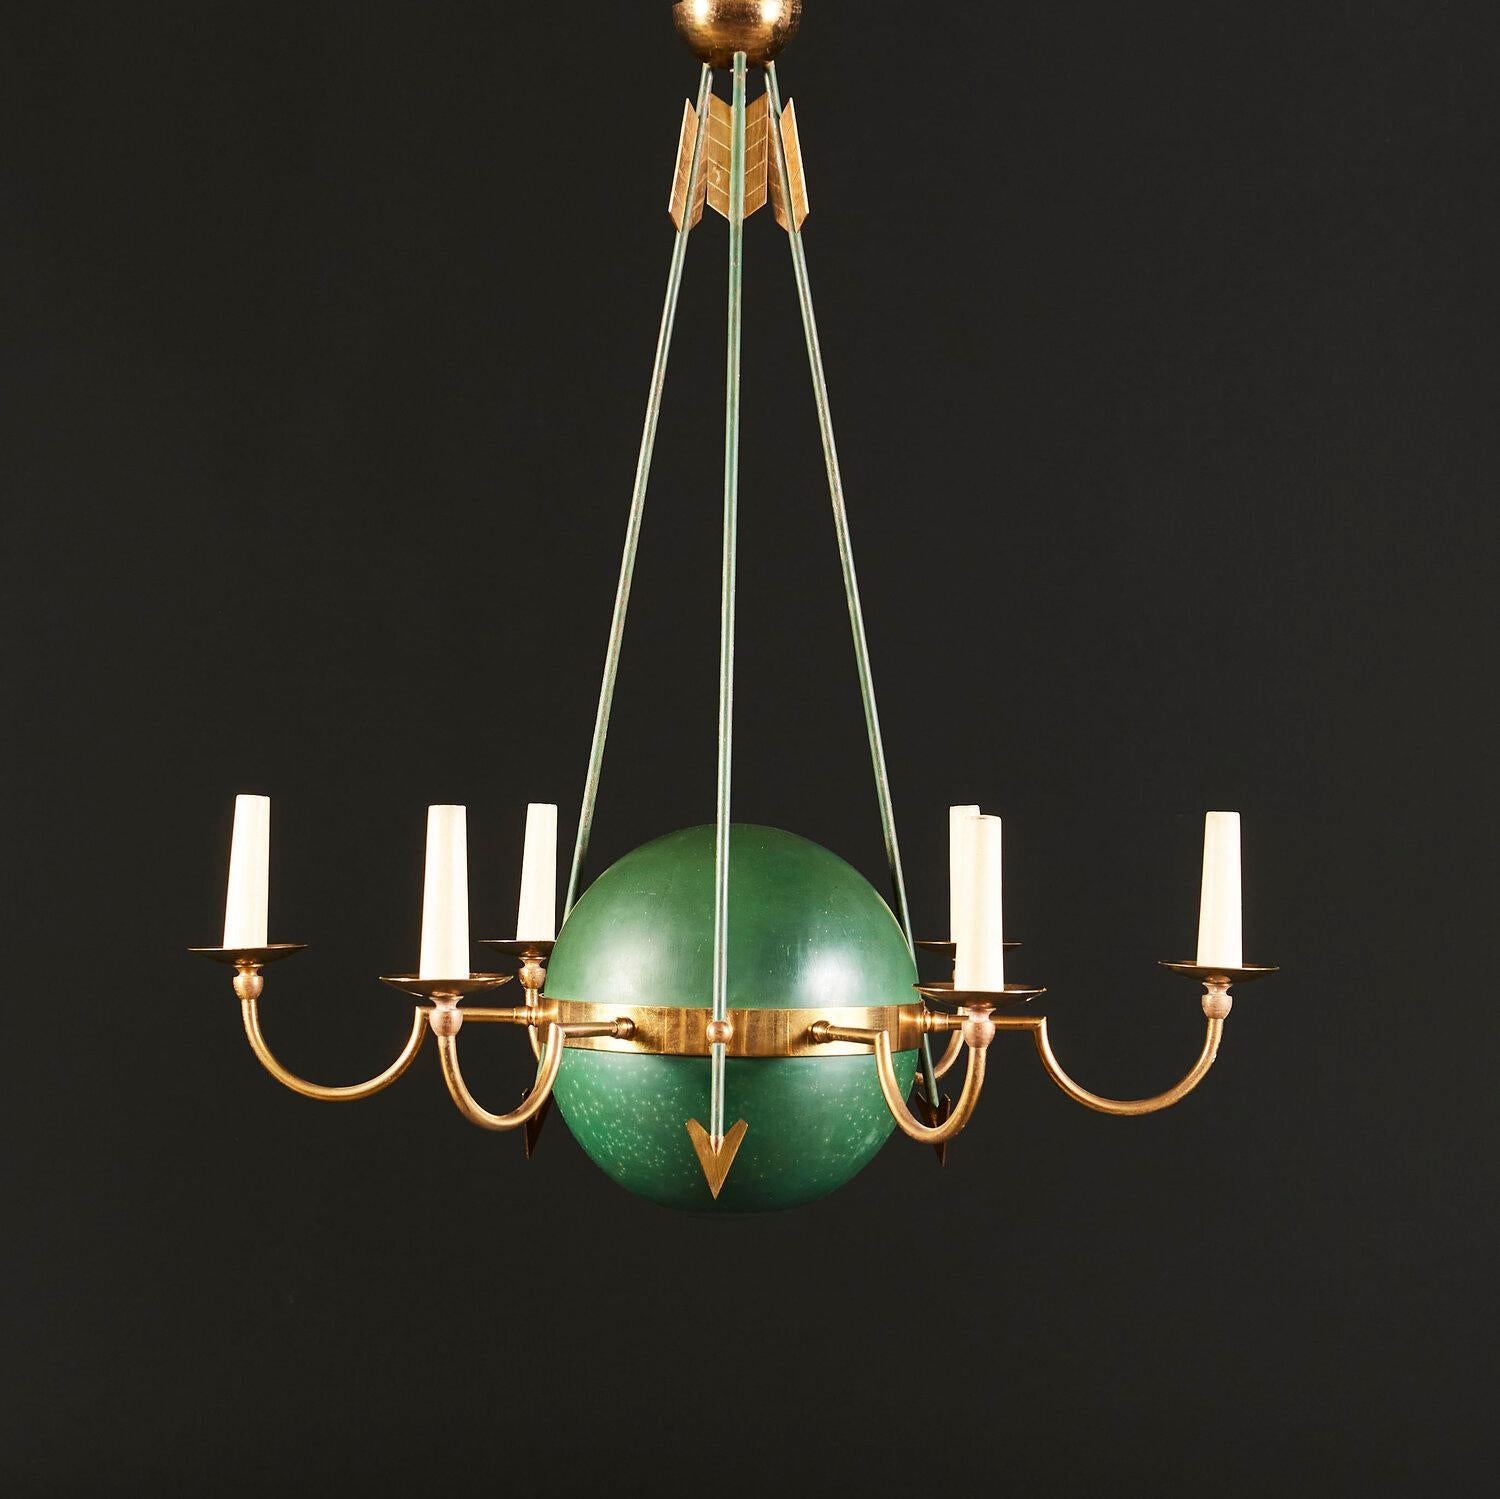 An unusual early twentieth century Empire style six arm chandelier with central green lacquer sphere held by three upright arrows, the curved brass arms terminating in drip trays holding the candles. Now converted for electricity.